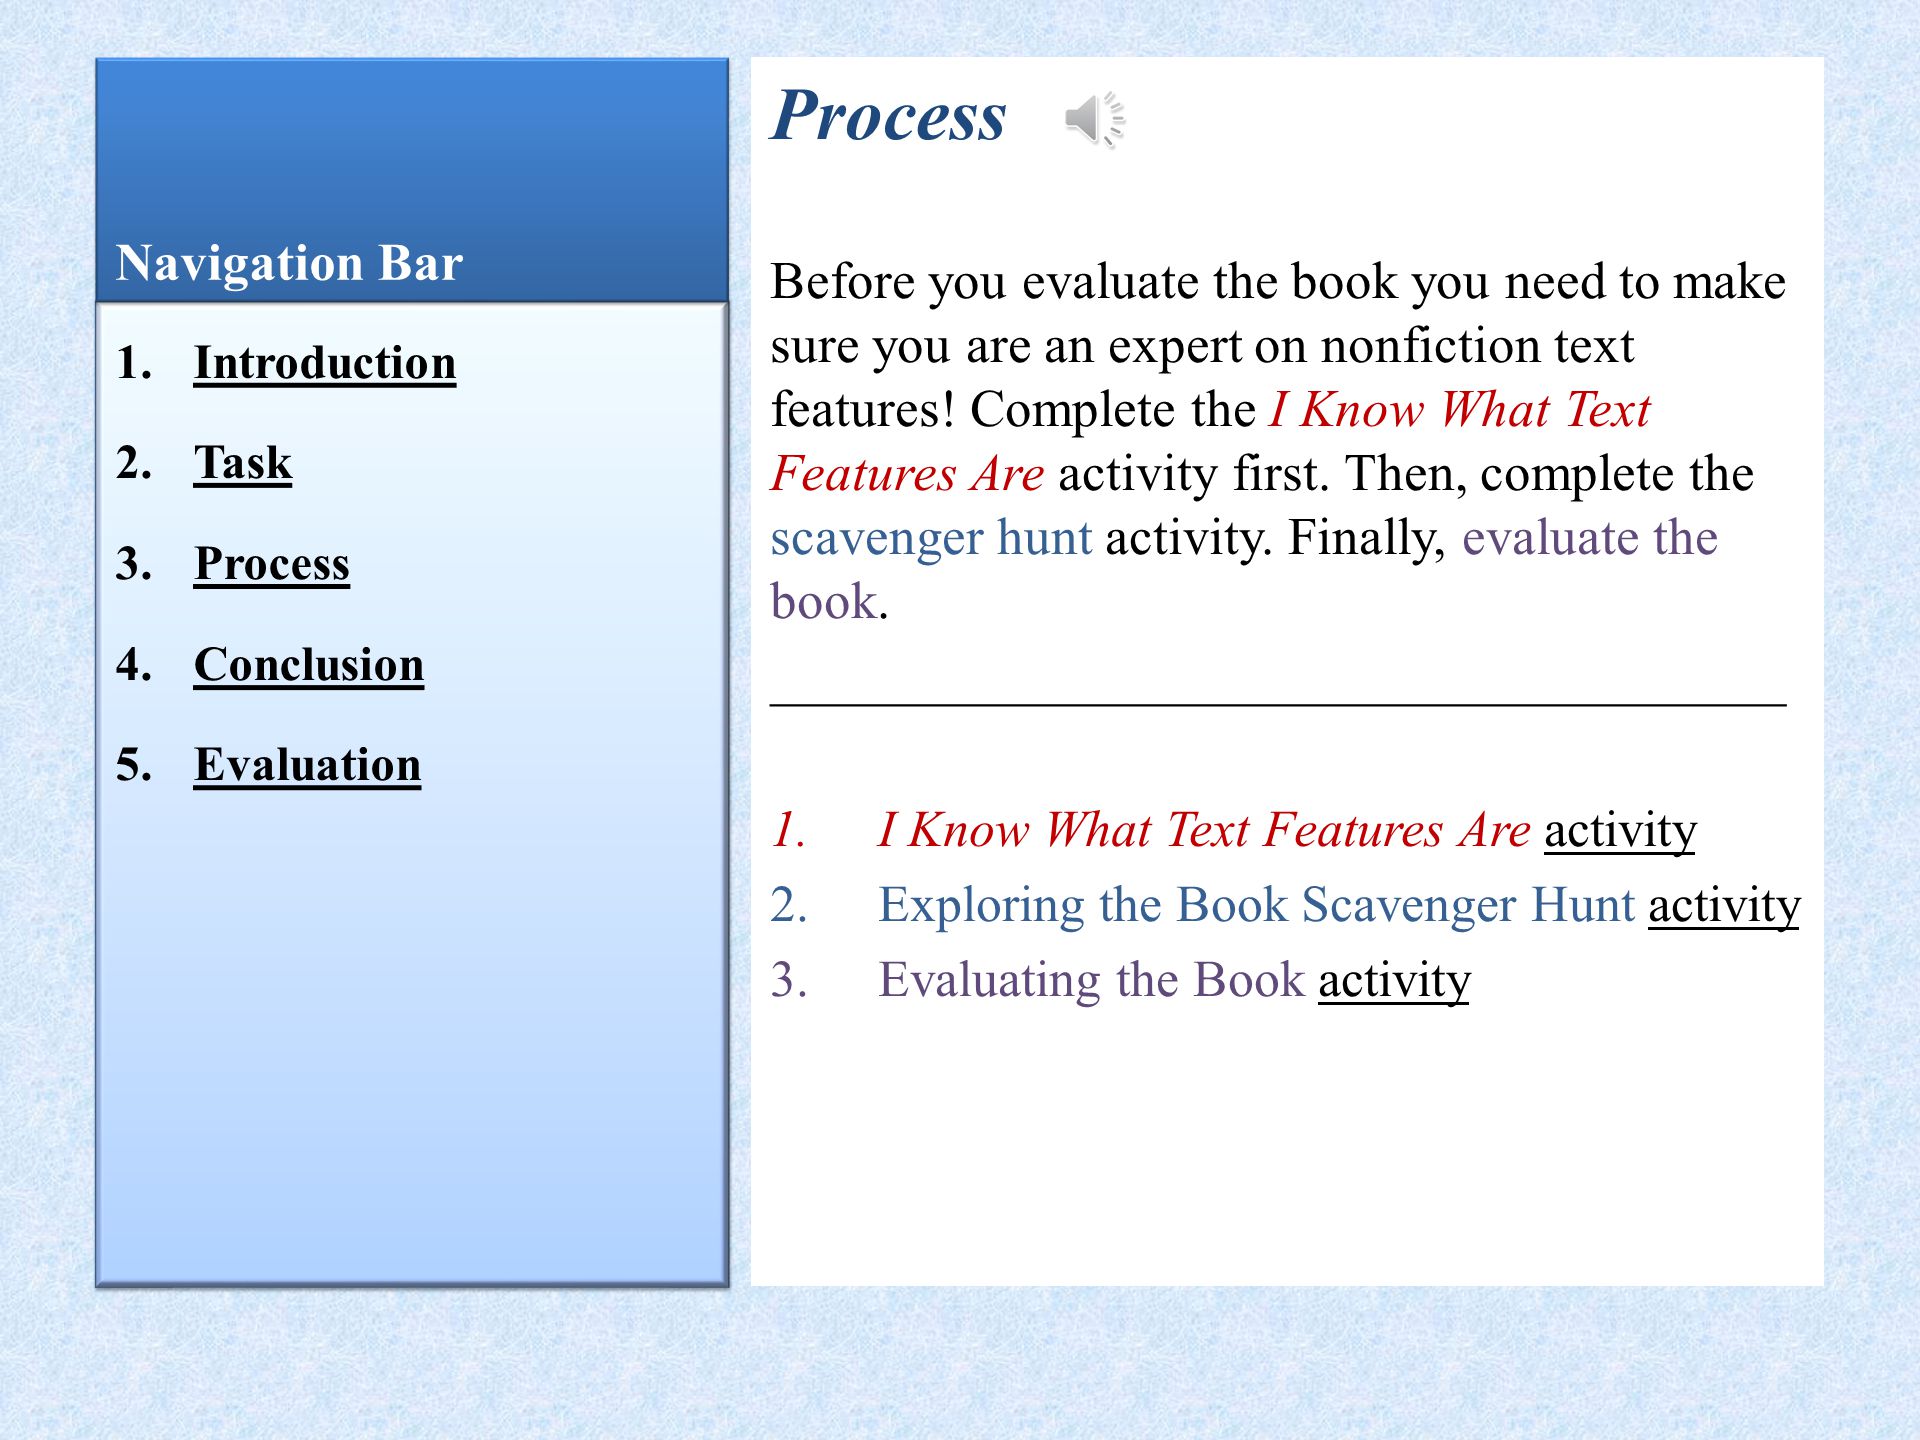 Task Your first lesson will be on nonfiction text features.